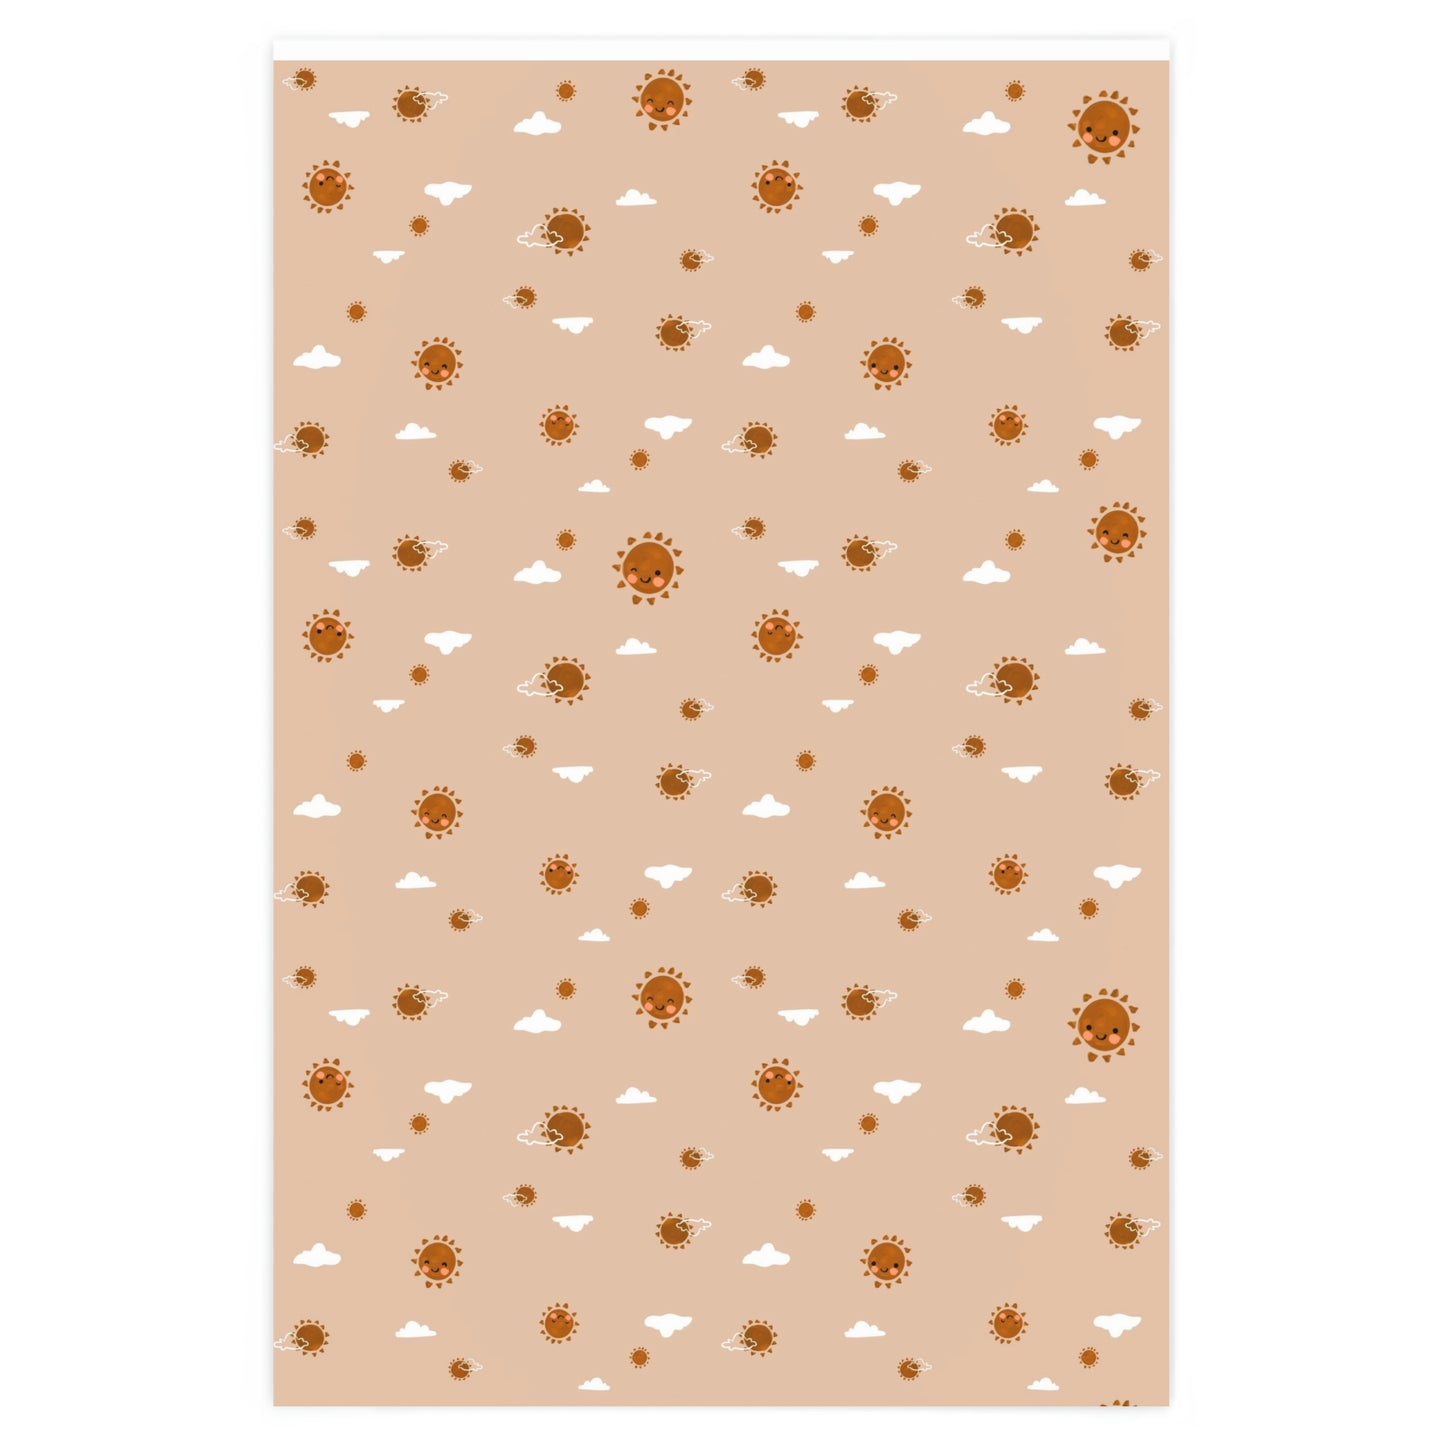 Sunny Days Wrapping Paper